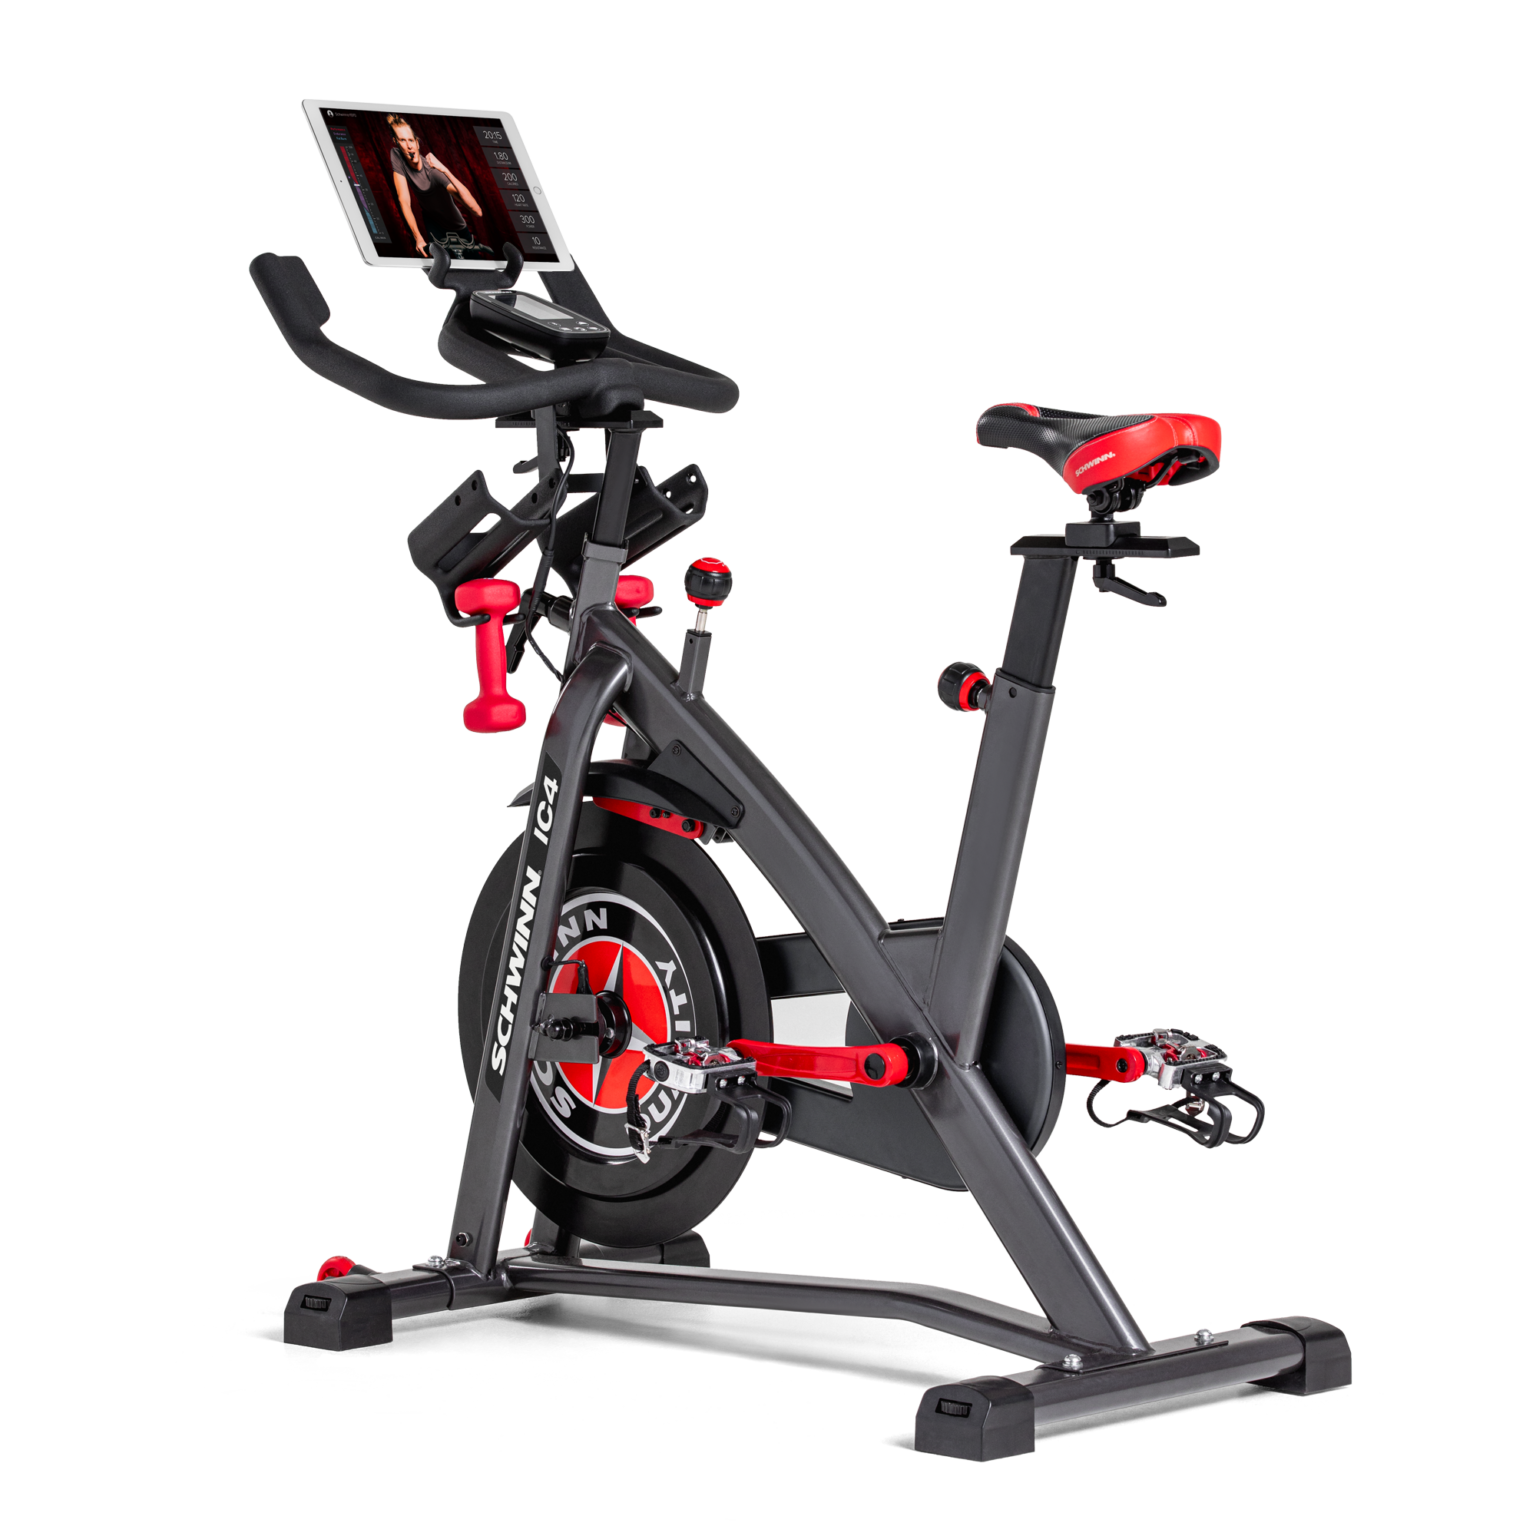 Best Exercise Bike for Bad Knees: Top List for 2022 | My Kind of Monday